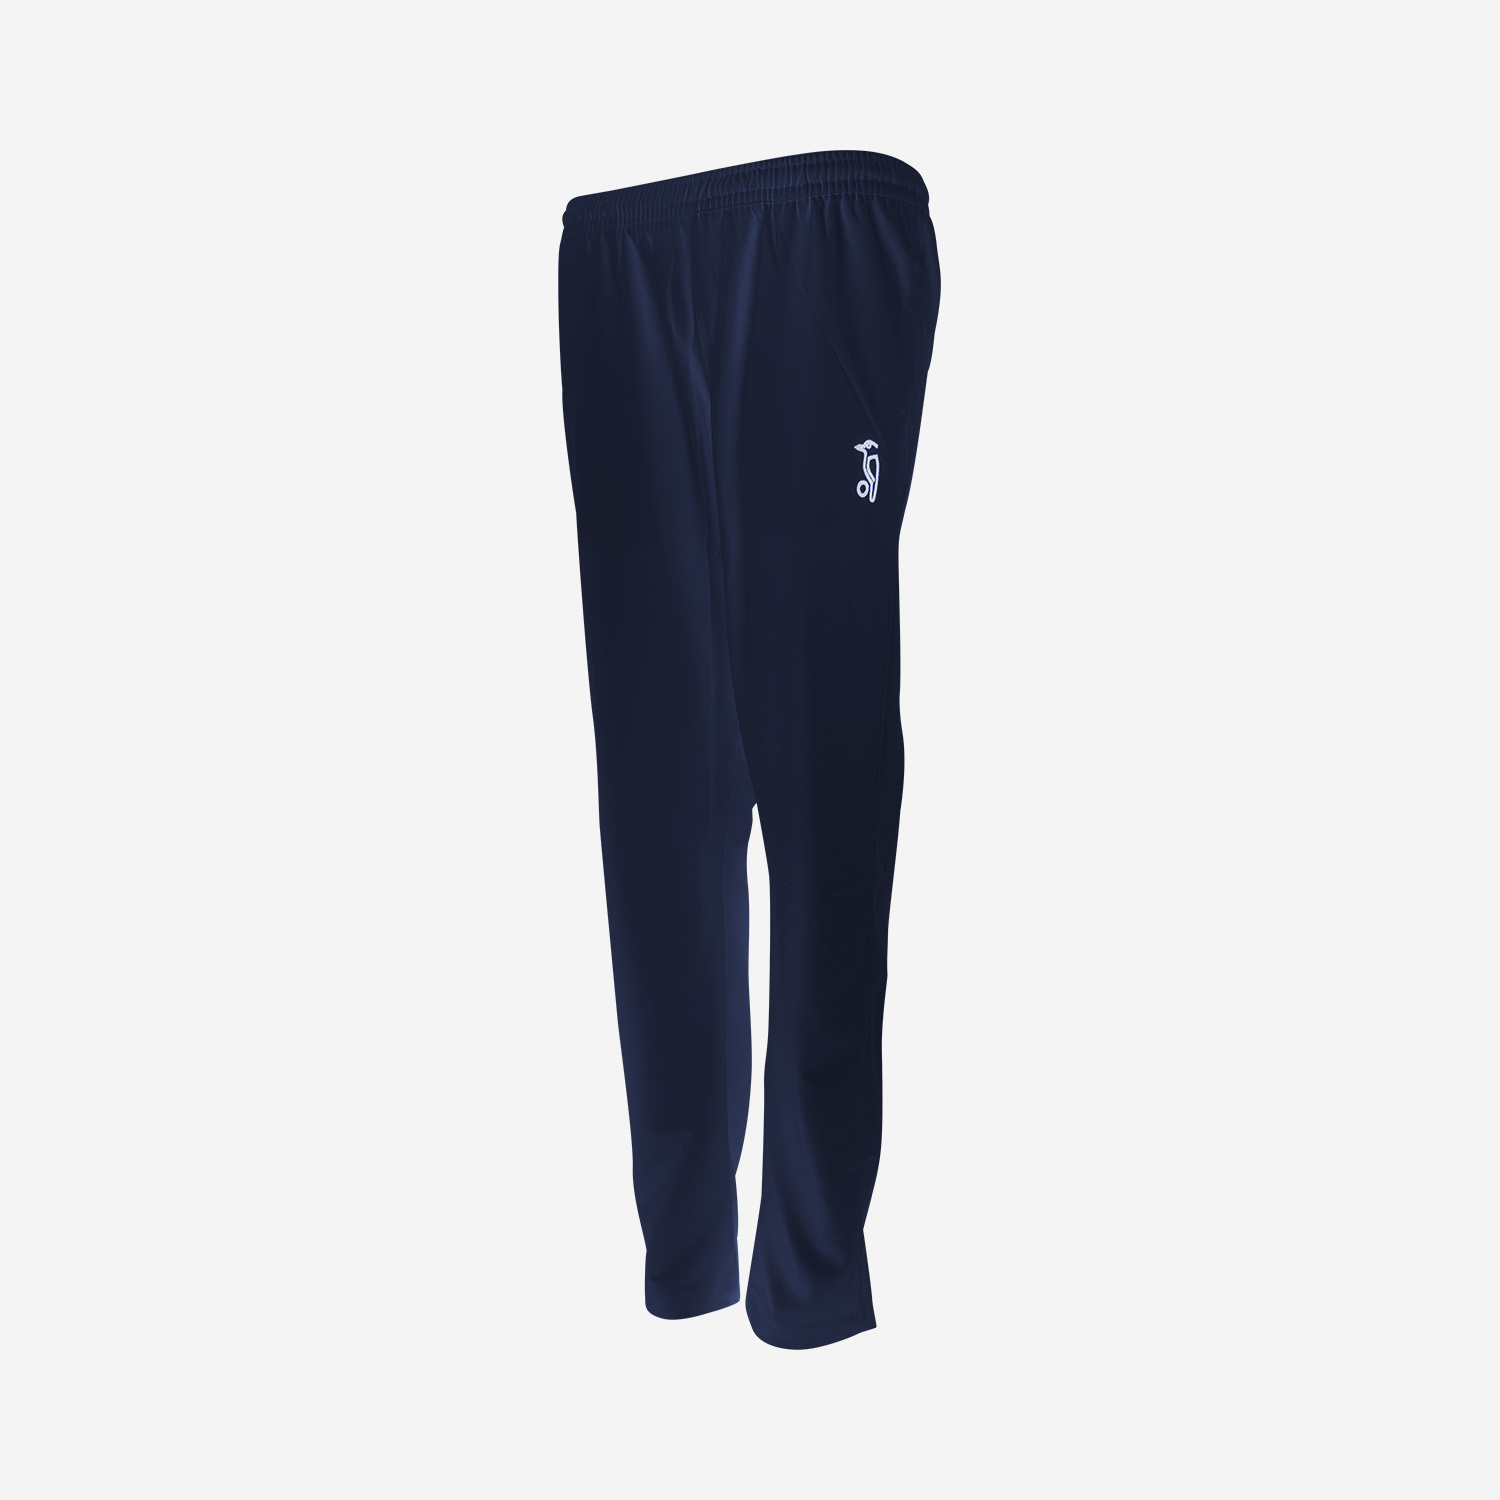 LADIES MATCH CRICKET TROUSERS